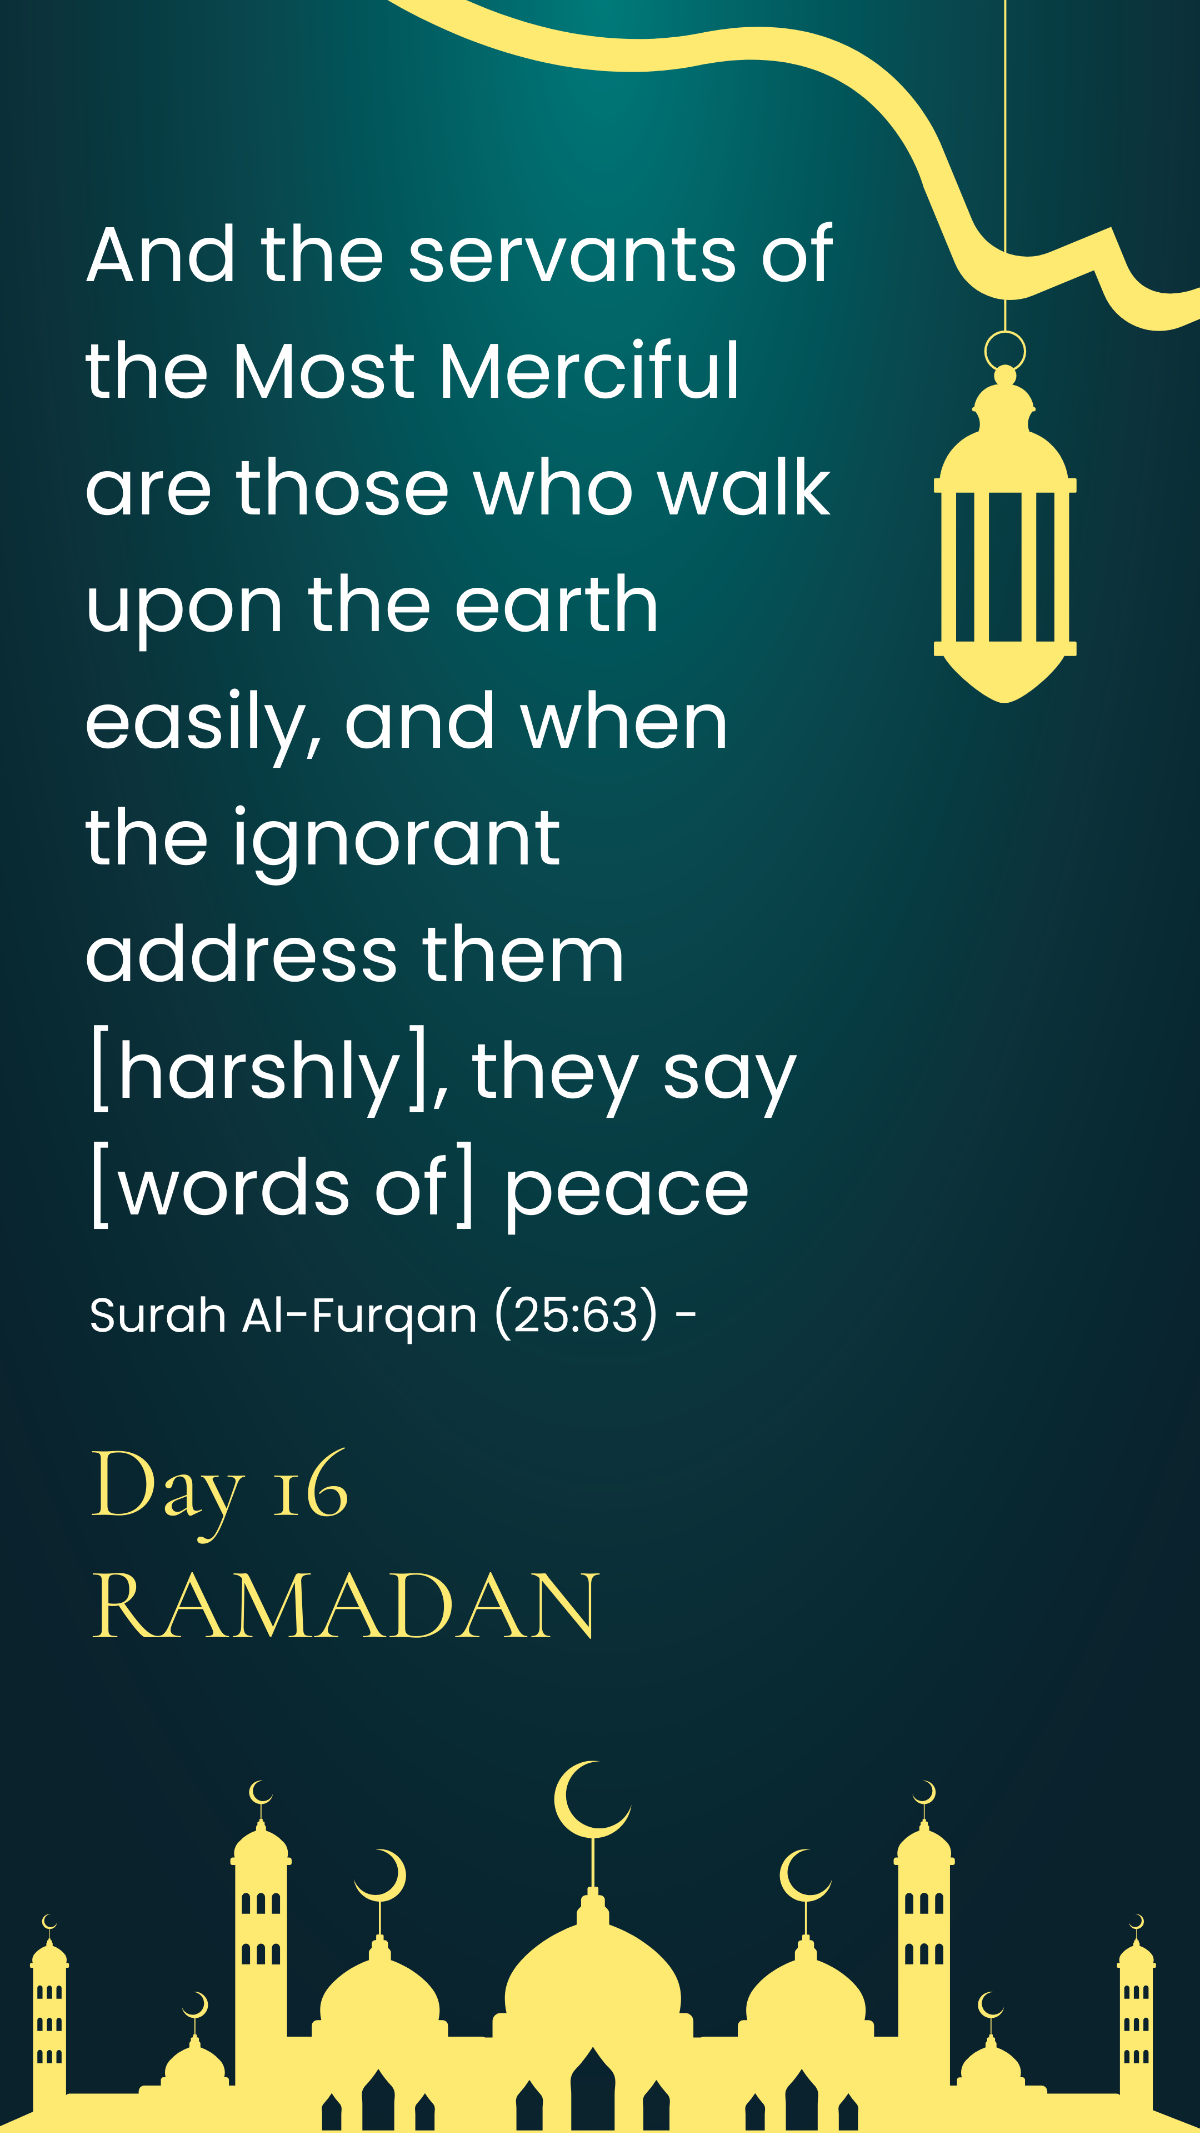 Ramadan Day 16 Quote Template